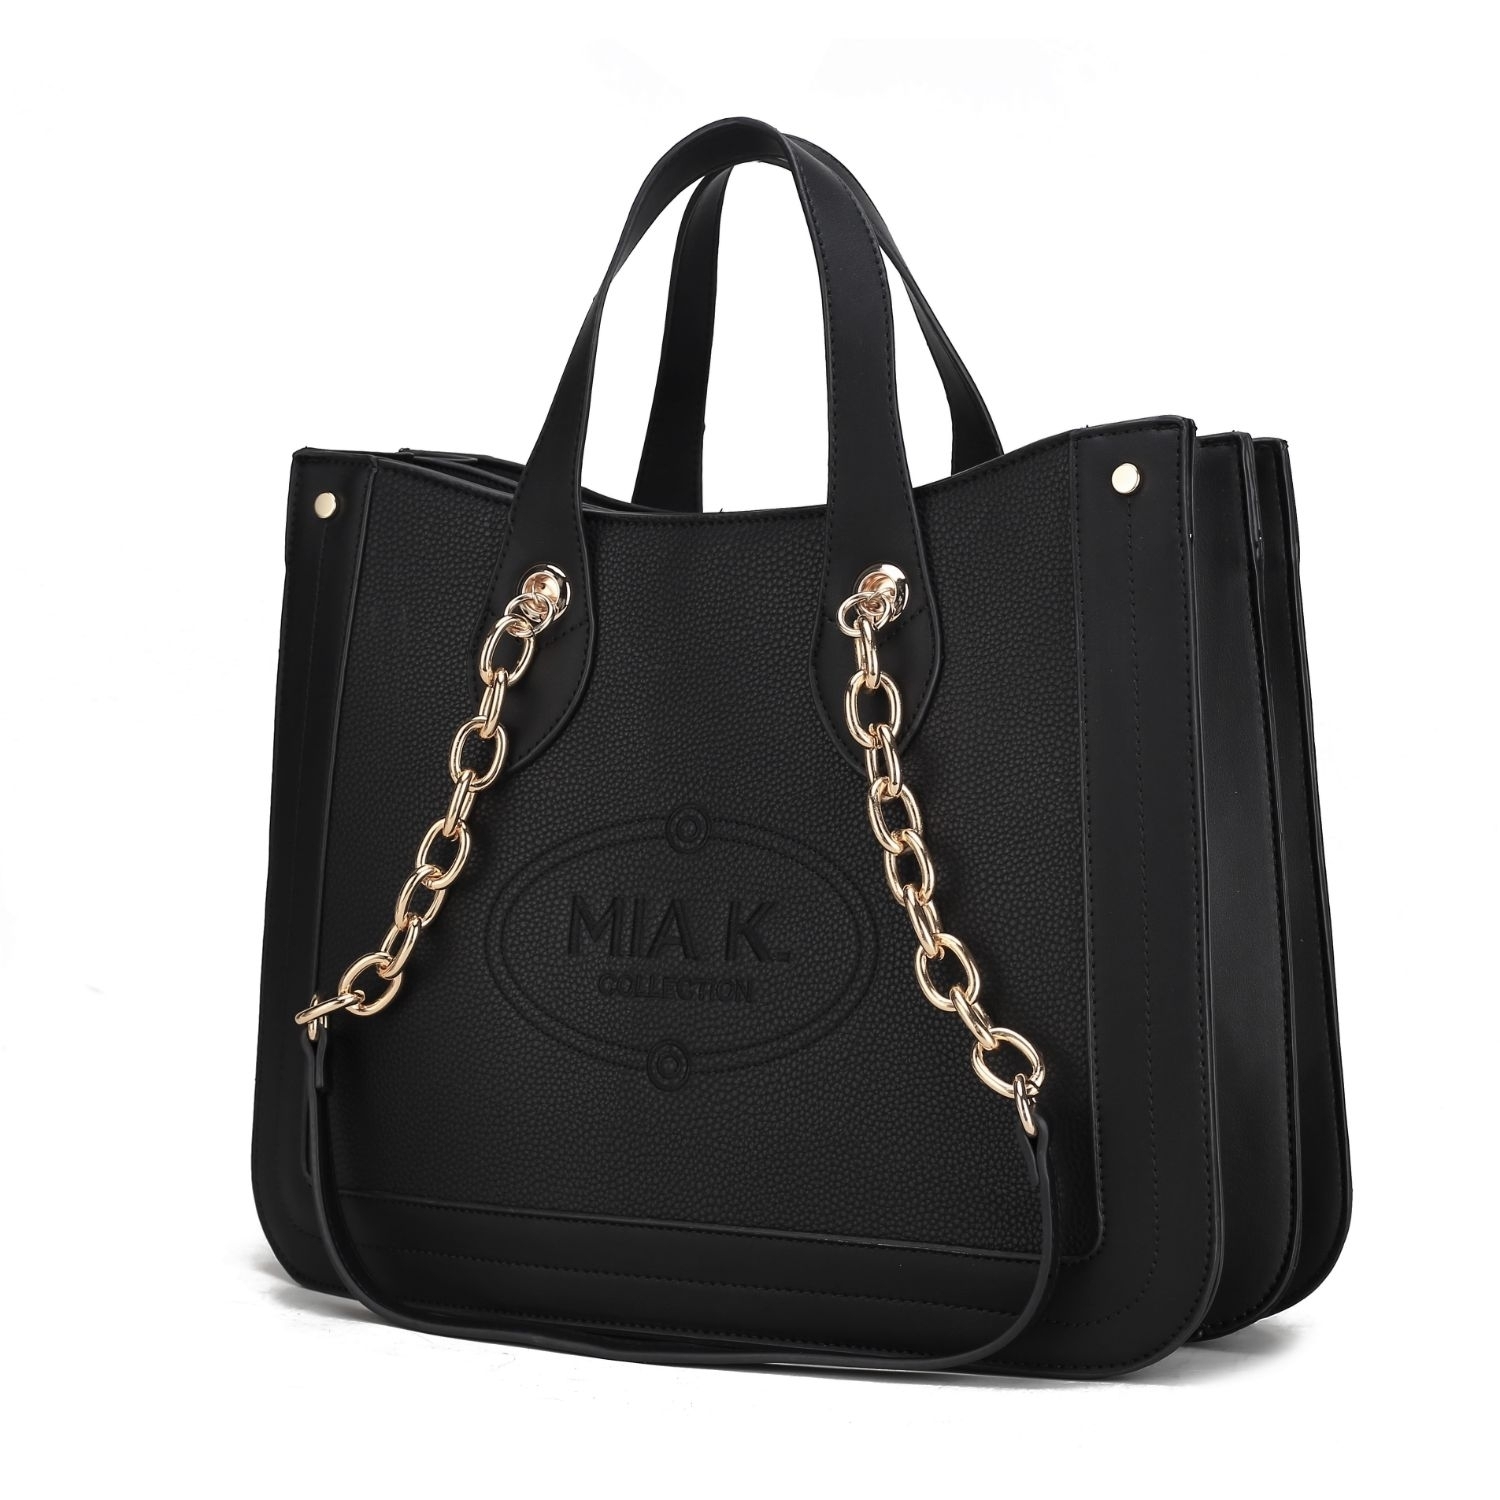 MKF Collection Stella Vegan Leather Women's Handbag Double Compartment Oversize Classy Tote By Mia K. - Taupe